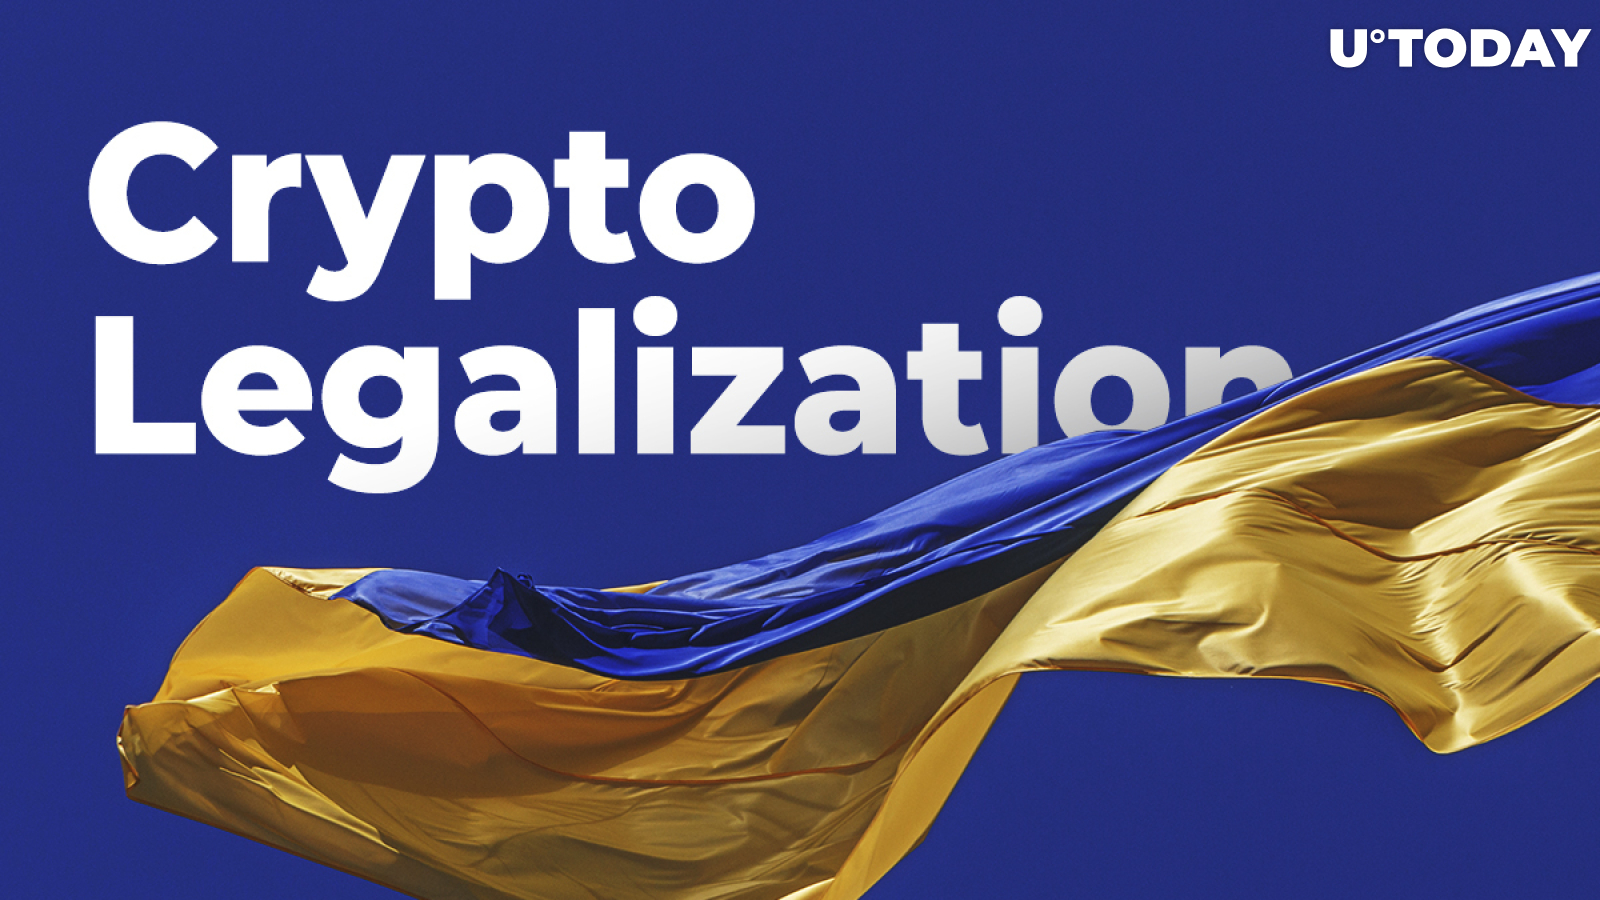 Why Ukraine’s Crypto Legalization Brings Broad Benefits to the Country